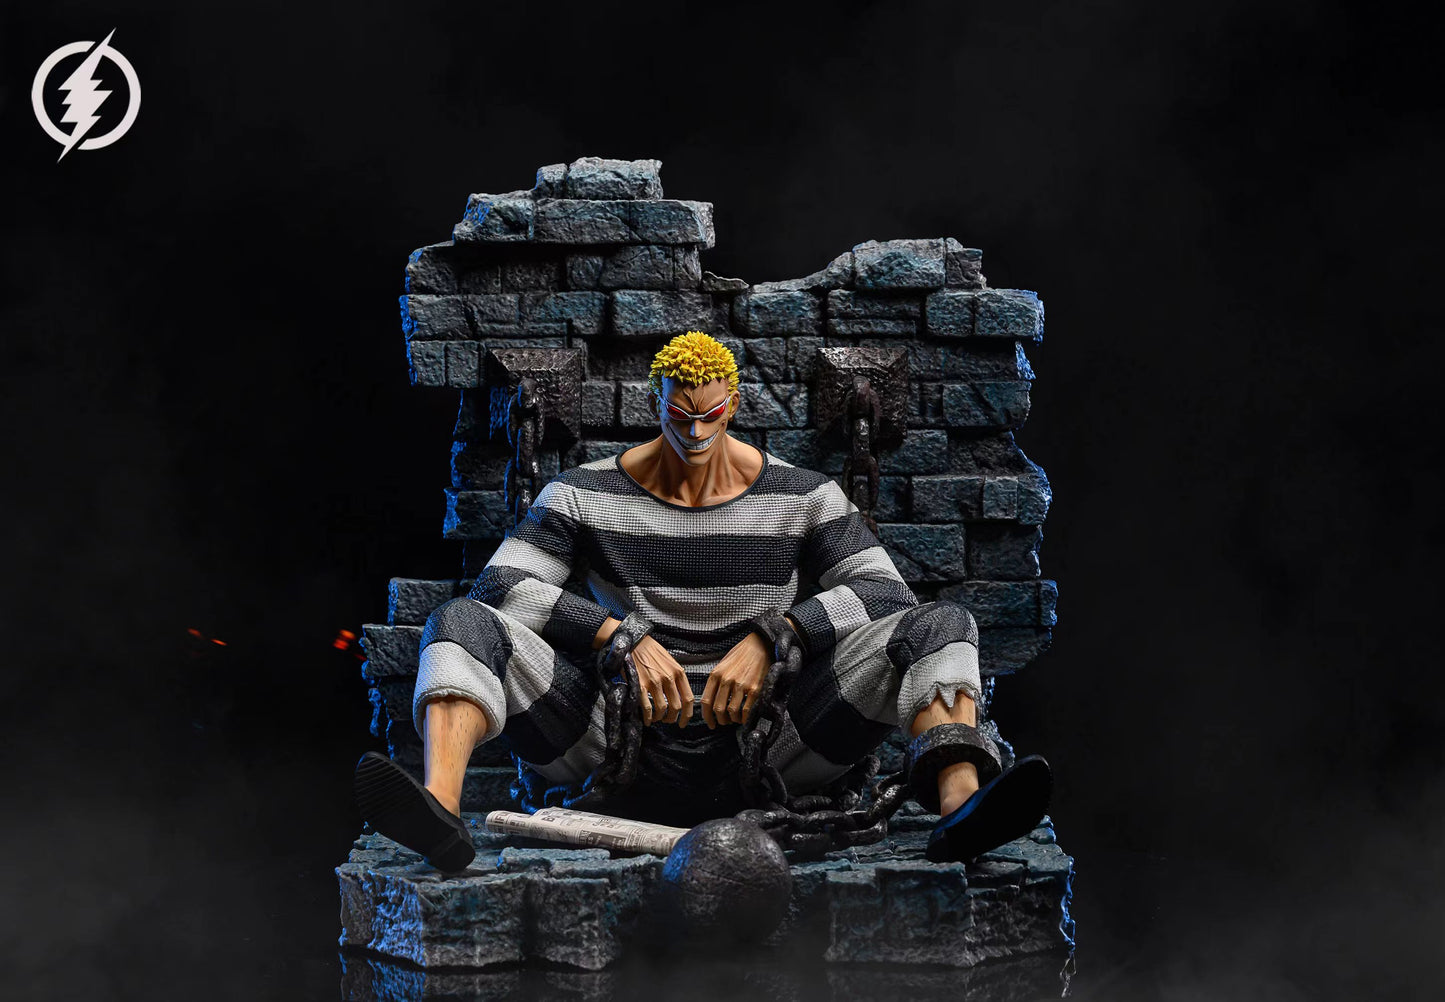 LIGHTNING STUDIO – ONE PIECE: PRISON SERIES 1. DOFLAMINGO [SOLD OUT]